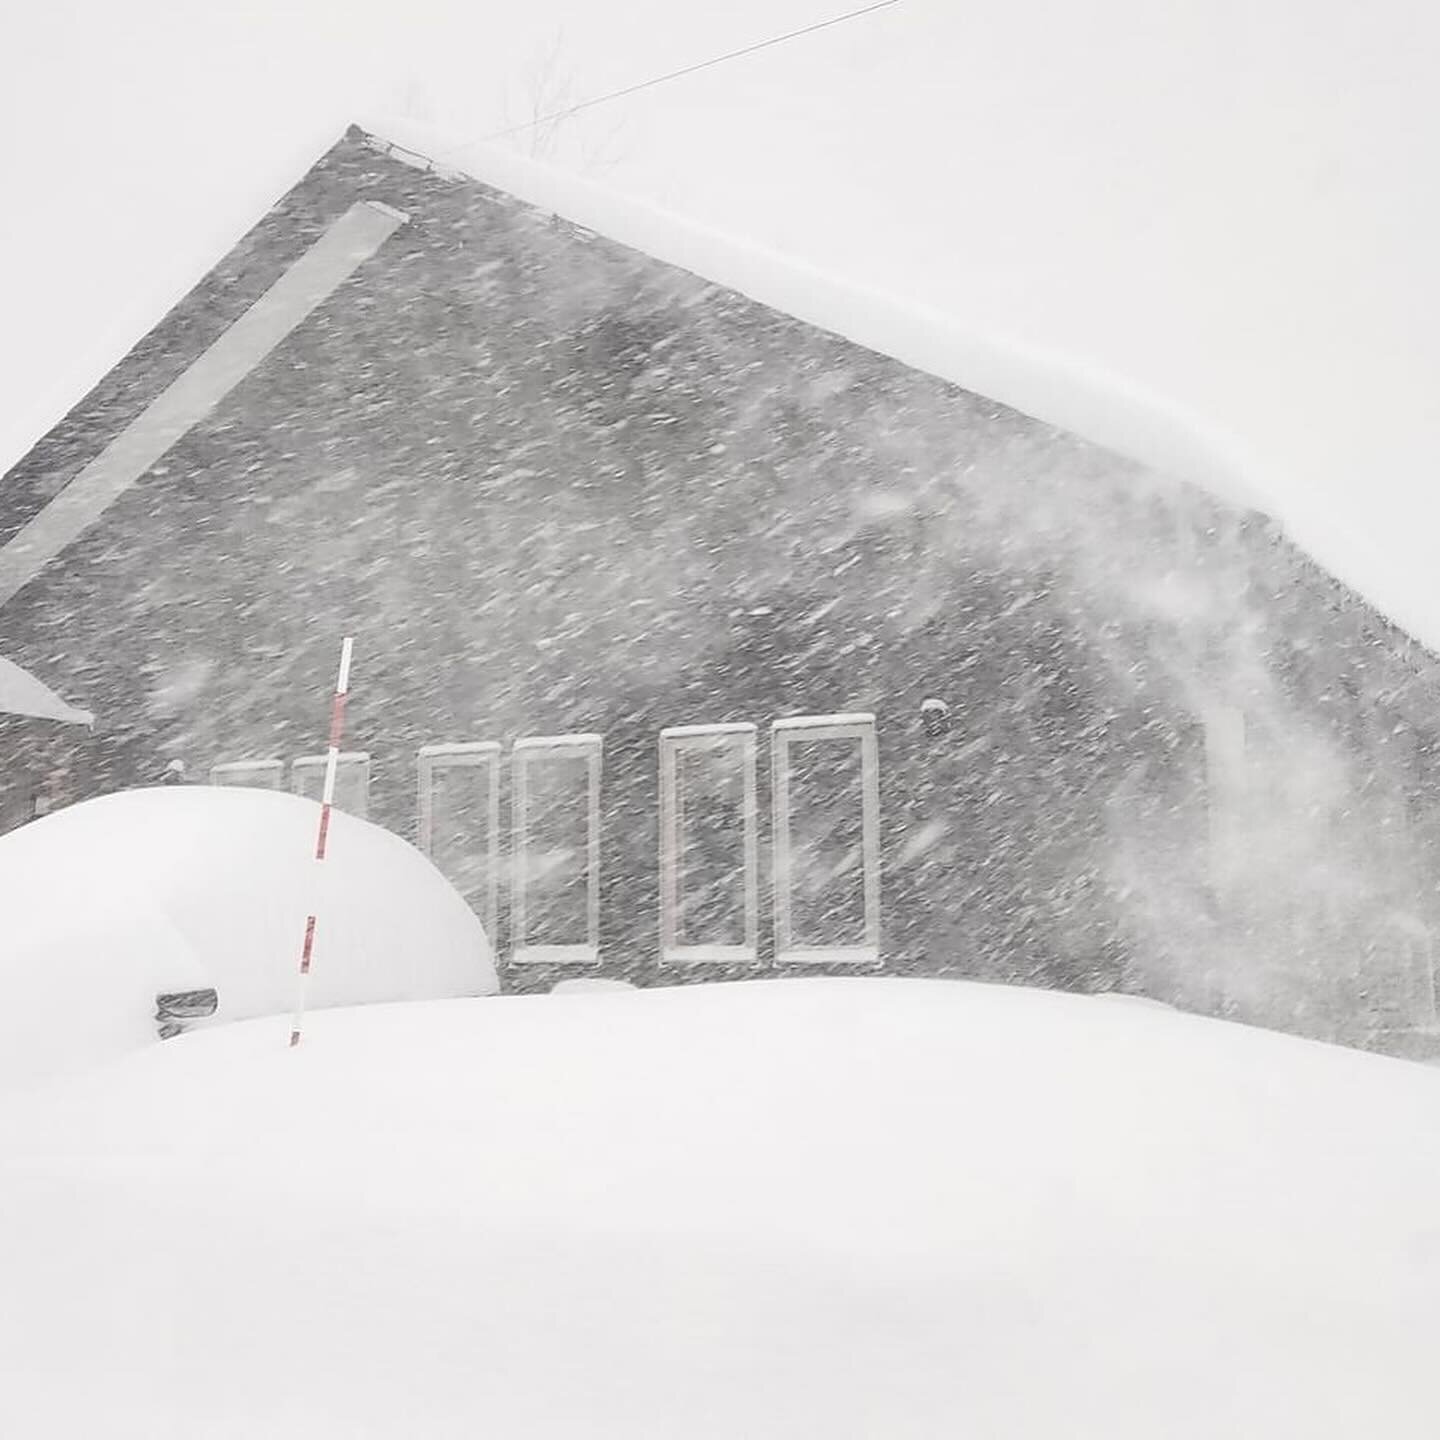 Did someone order 70cm of fresh snow in 24 hours?

If so&hellip;. Rusutsu has delivered! 

These shots from @rupowlodge show the insanity of Hokkaido right now.

📸 @rupowlodge 

#rusutsu #rusutsuresort #rusutsuskiresort #hokkaido #sapporo #hokkaidot